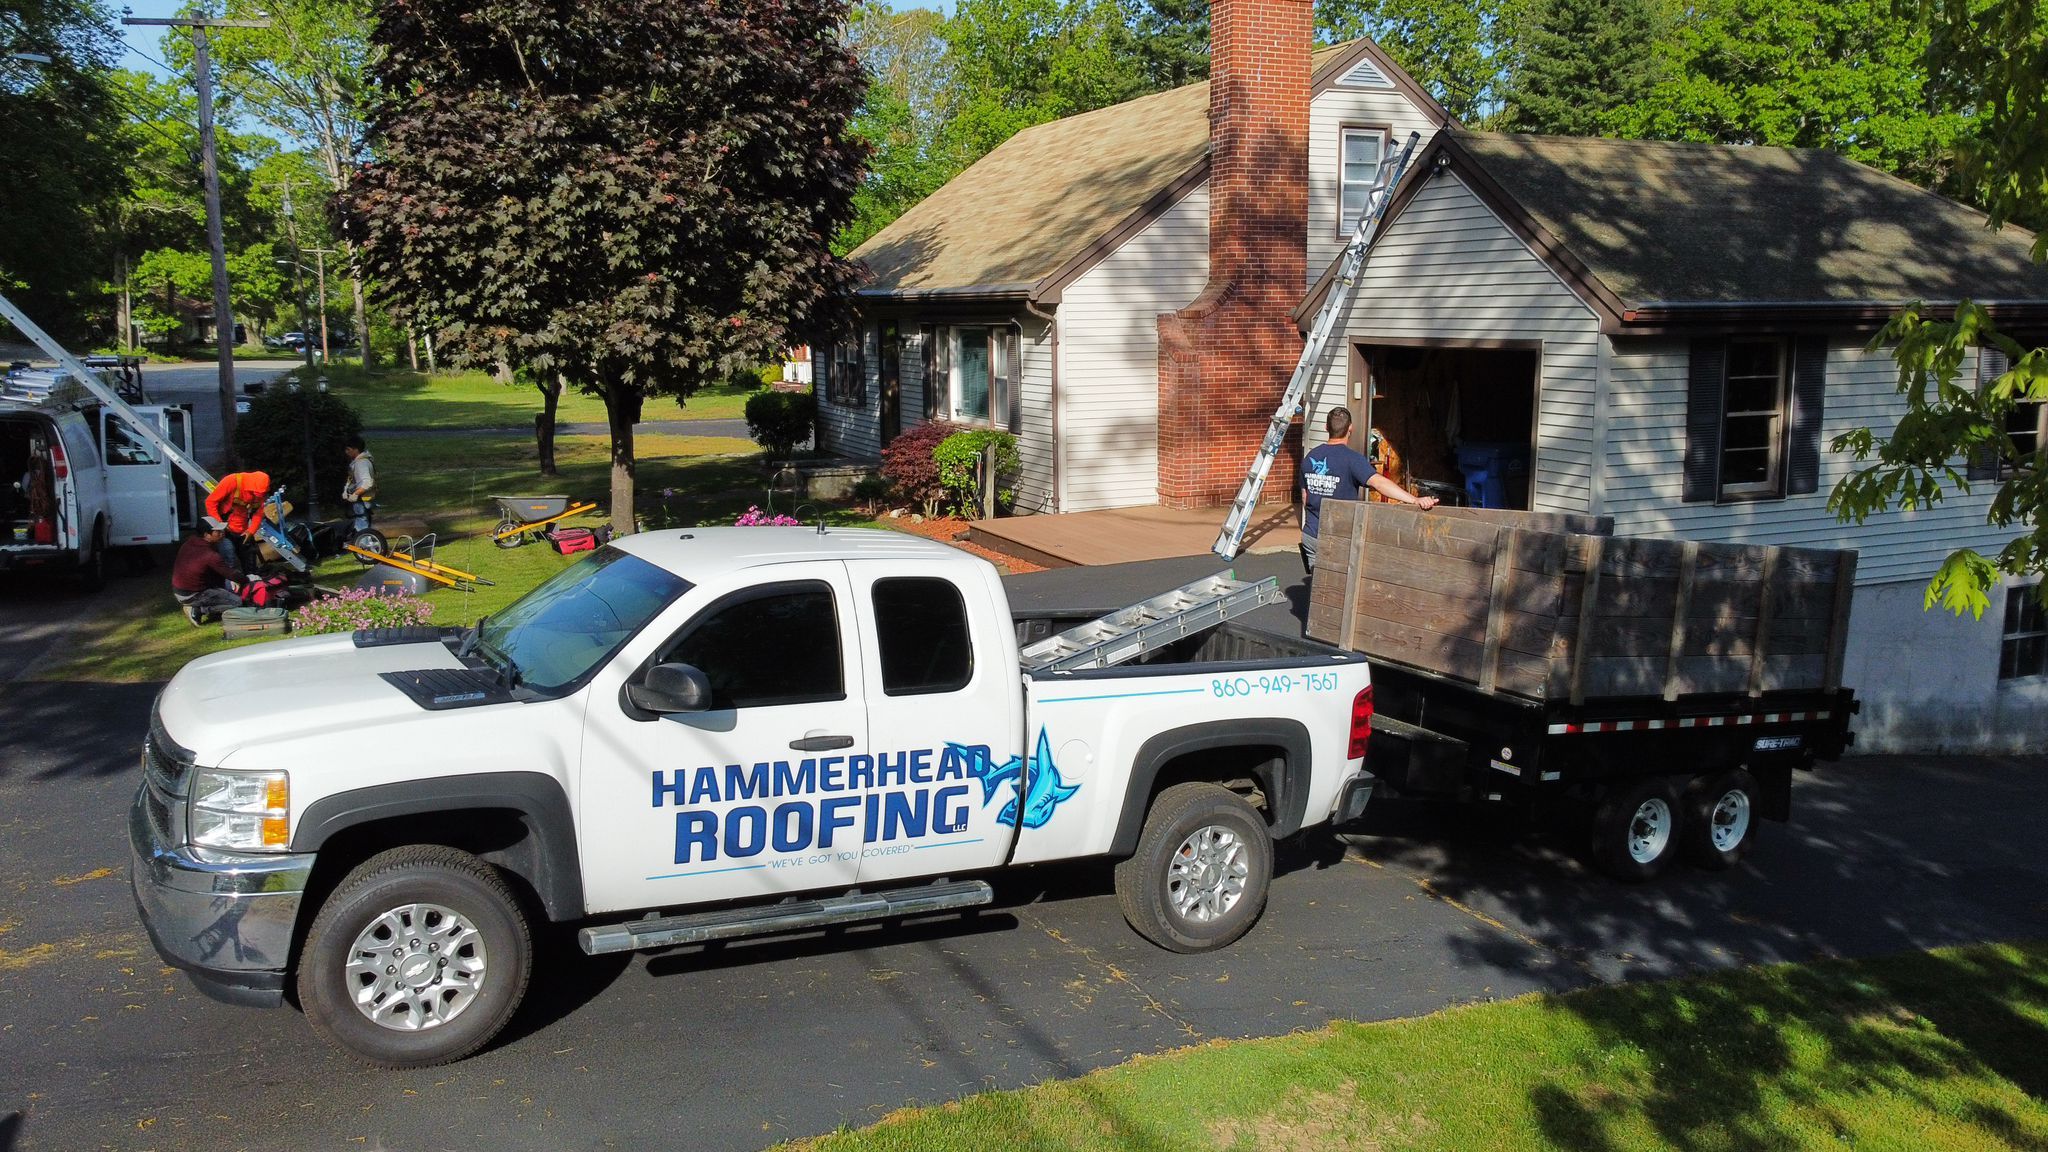 Hammerhead roofing crews on location installing a new roof on a home